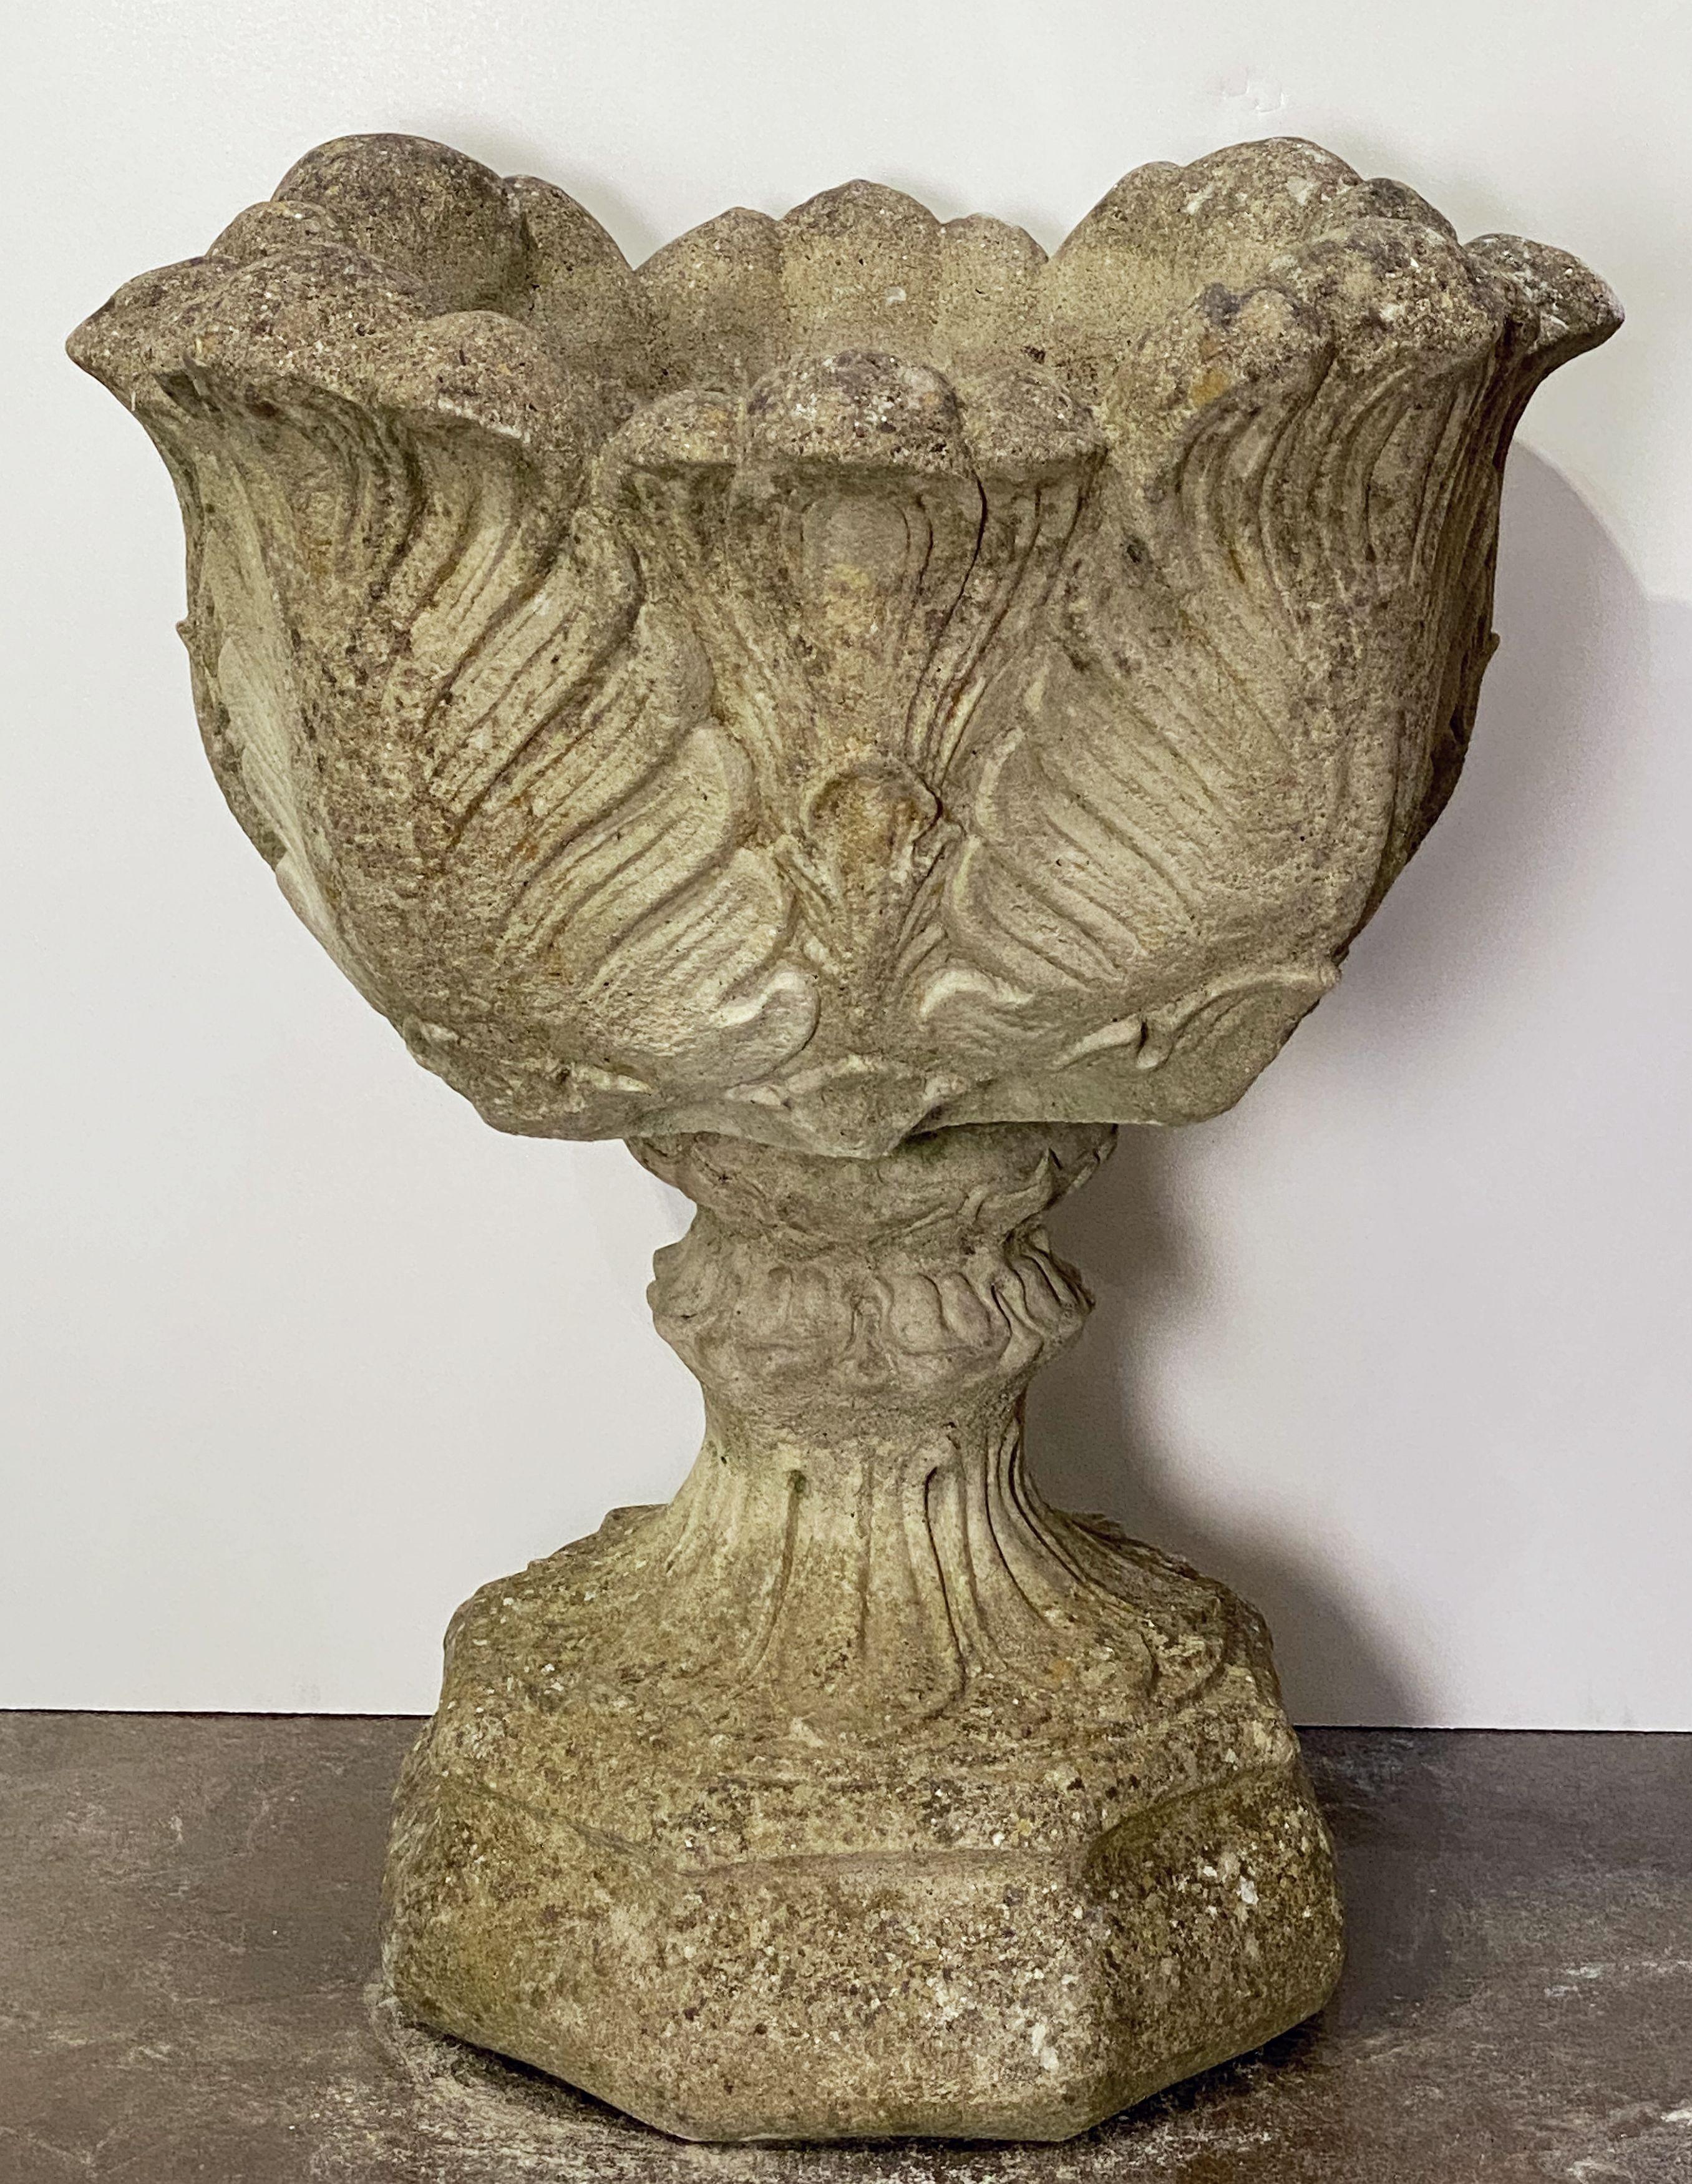 20th Century English Garden Stone Urn or Planter Pot on Plinth with Acanthus Leaf Design